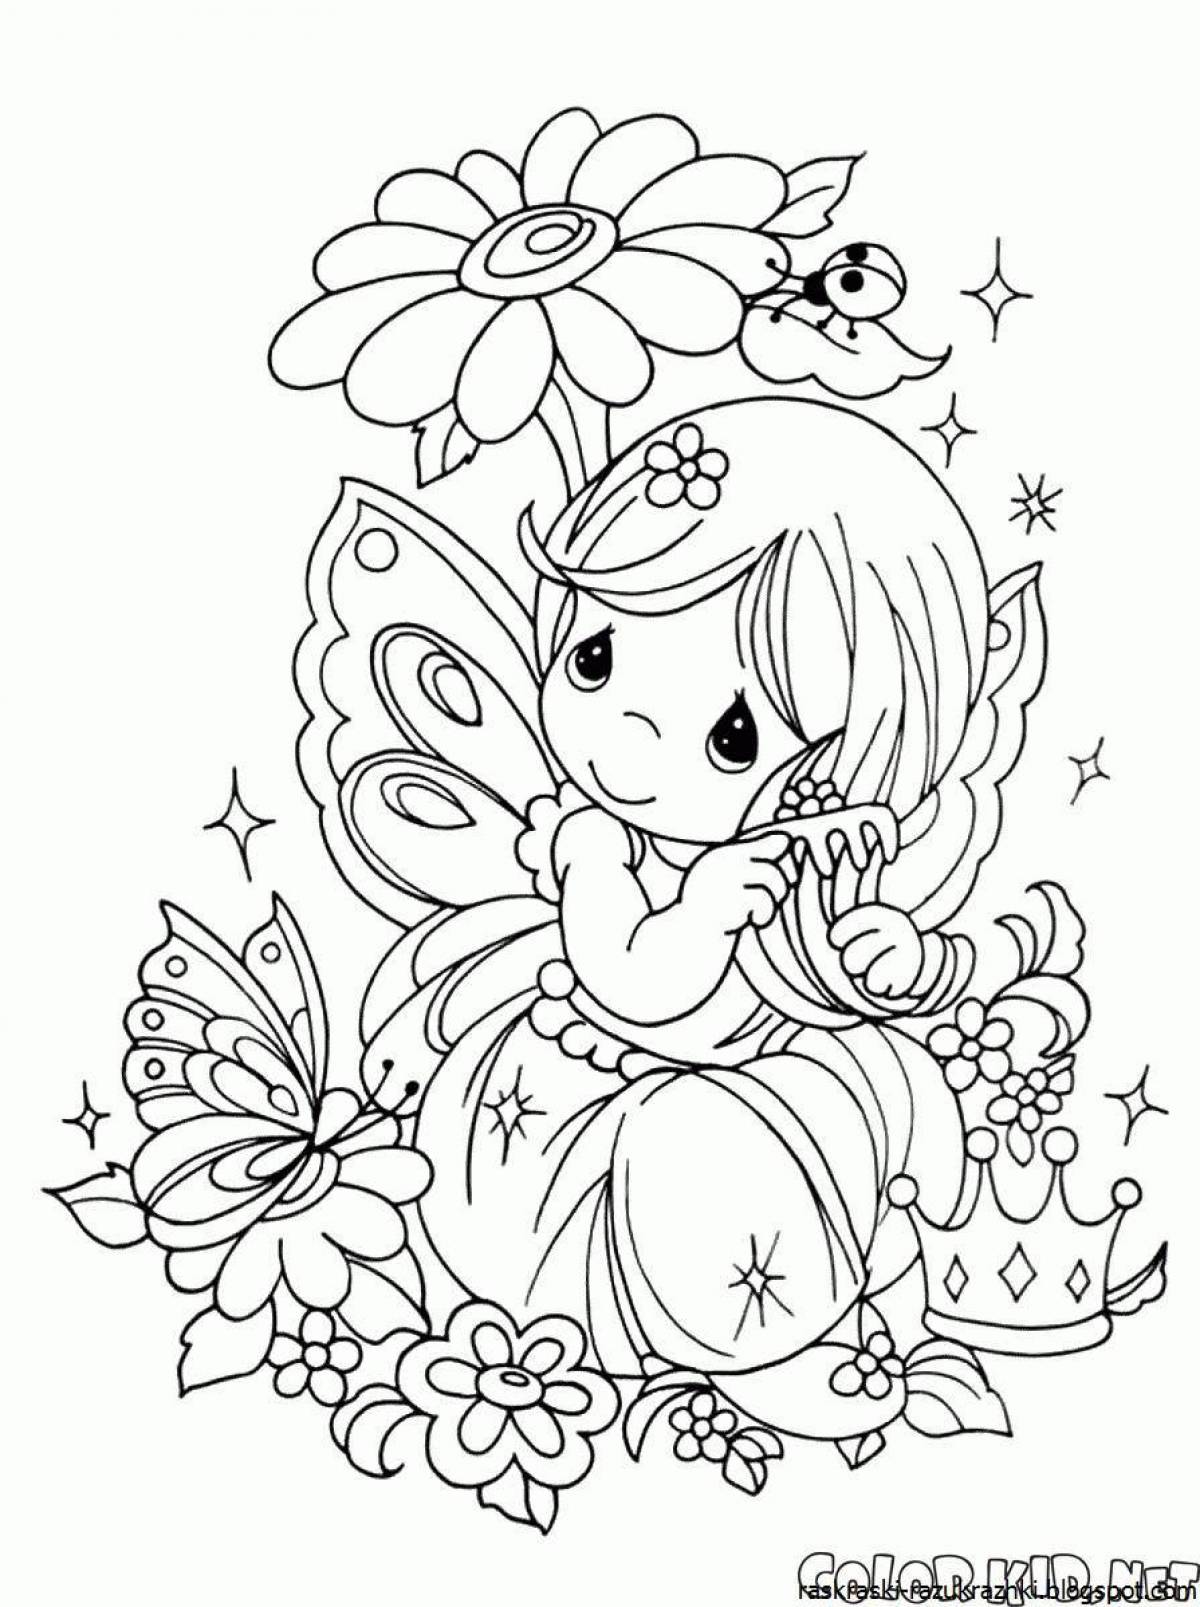 Delightful coloring for girls